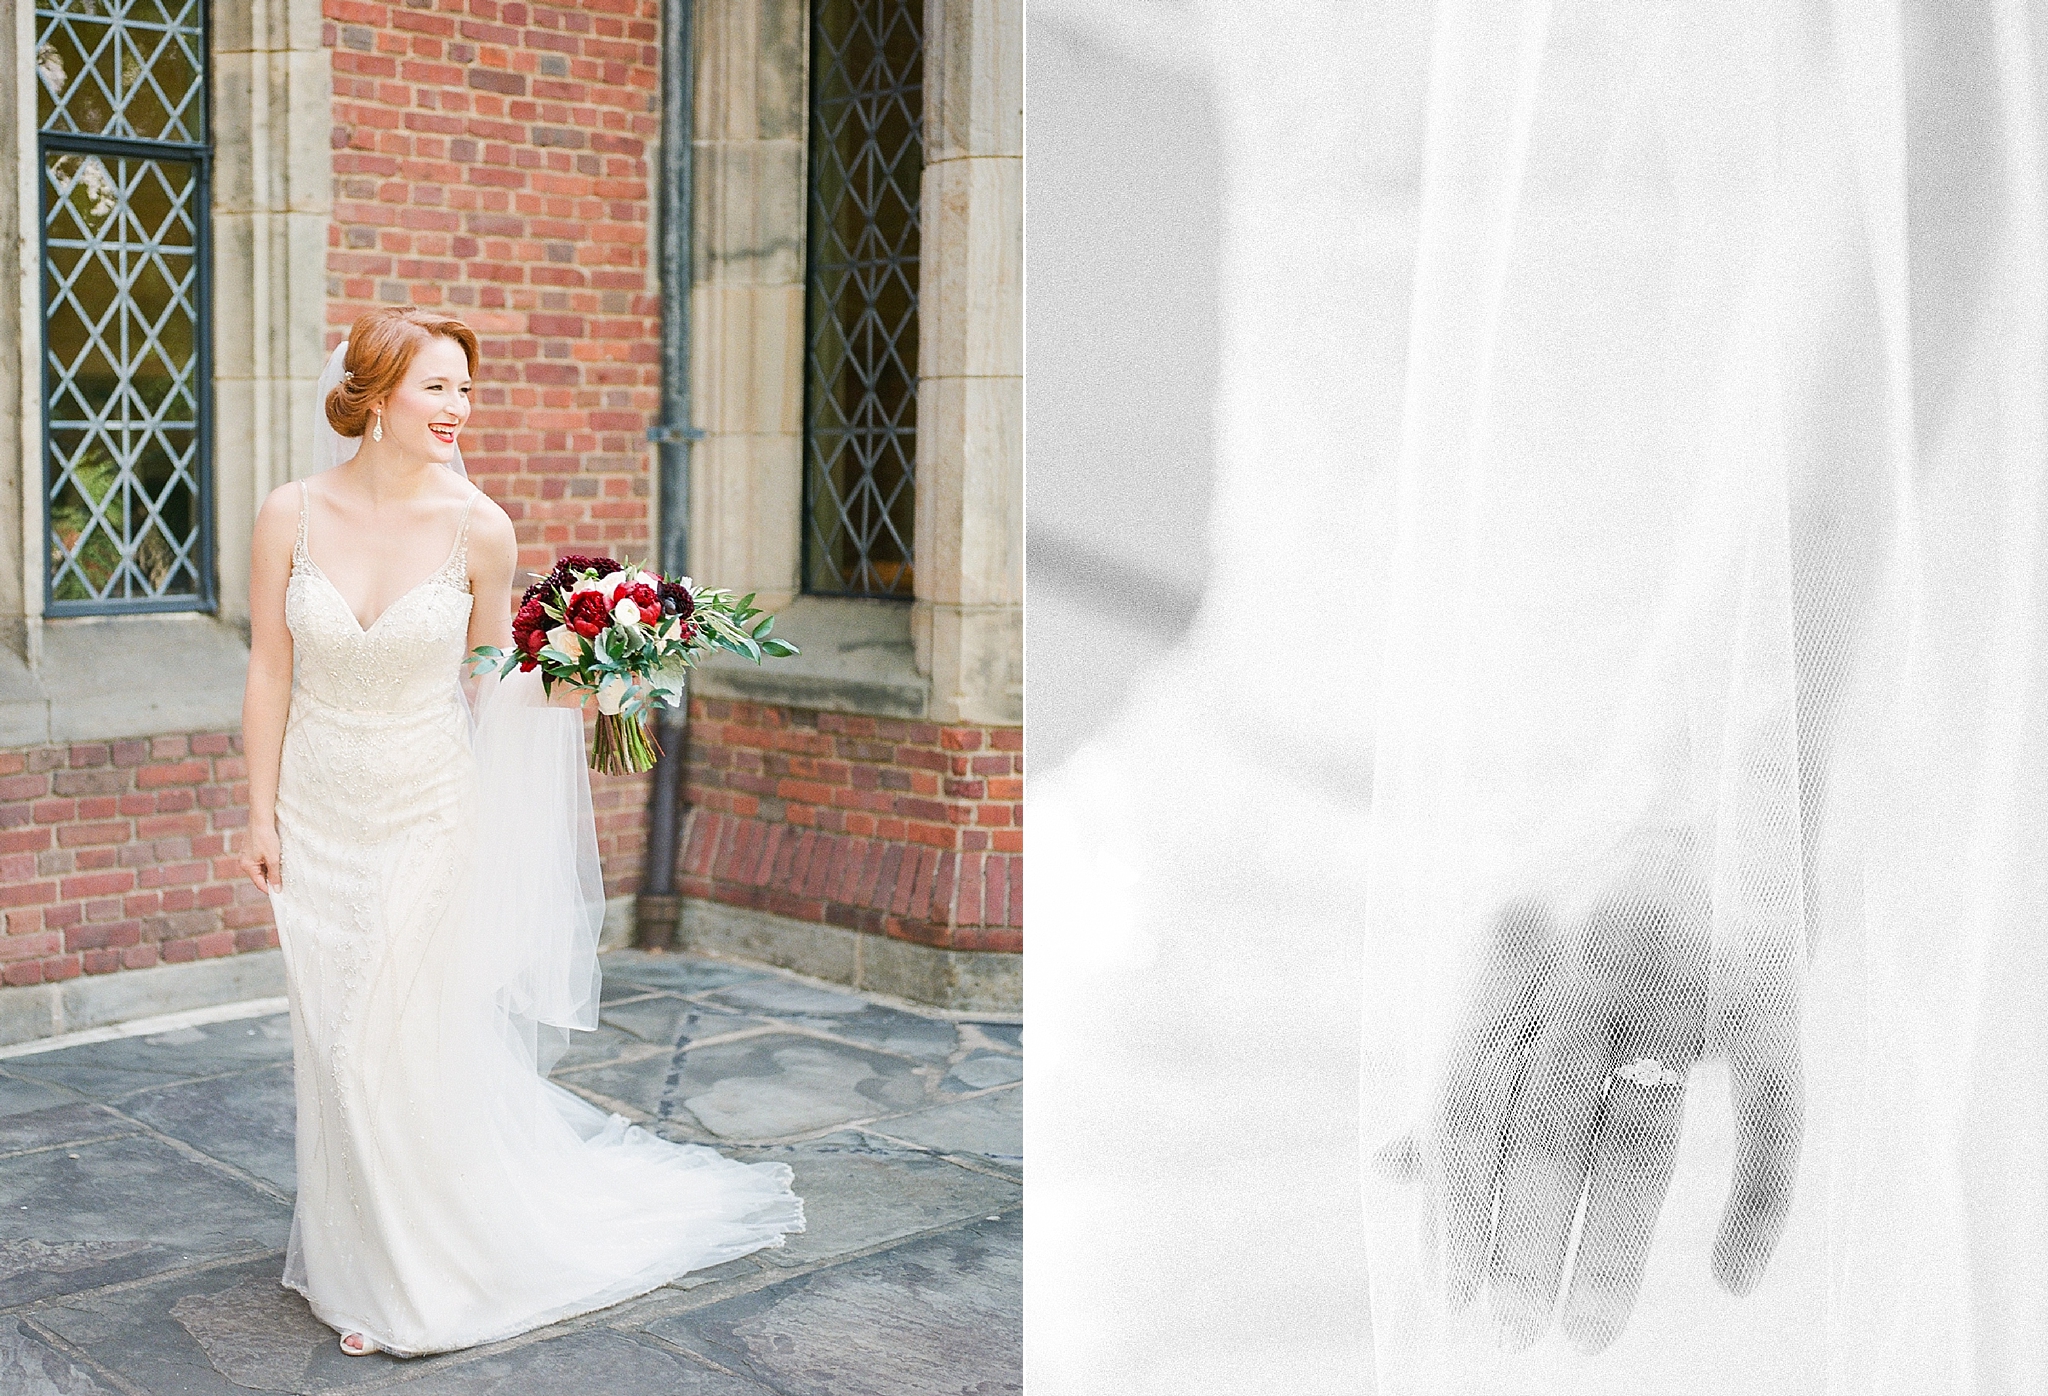 These timeless film bridal portraits were captured at the Branch Museum in Richmond, VA by Washington, DC fine art wedding photographer, Alicia Lacey.